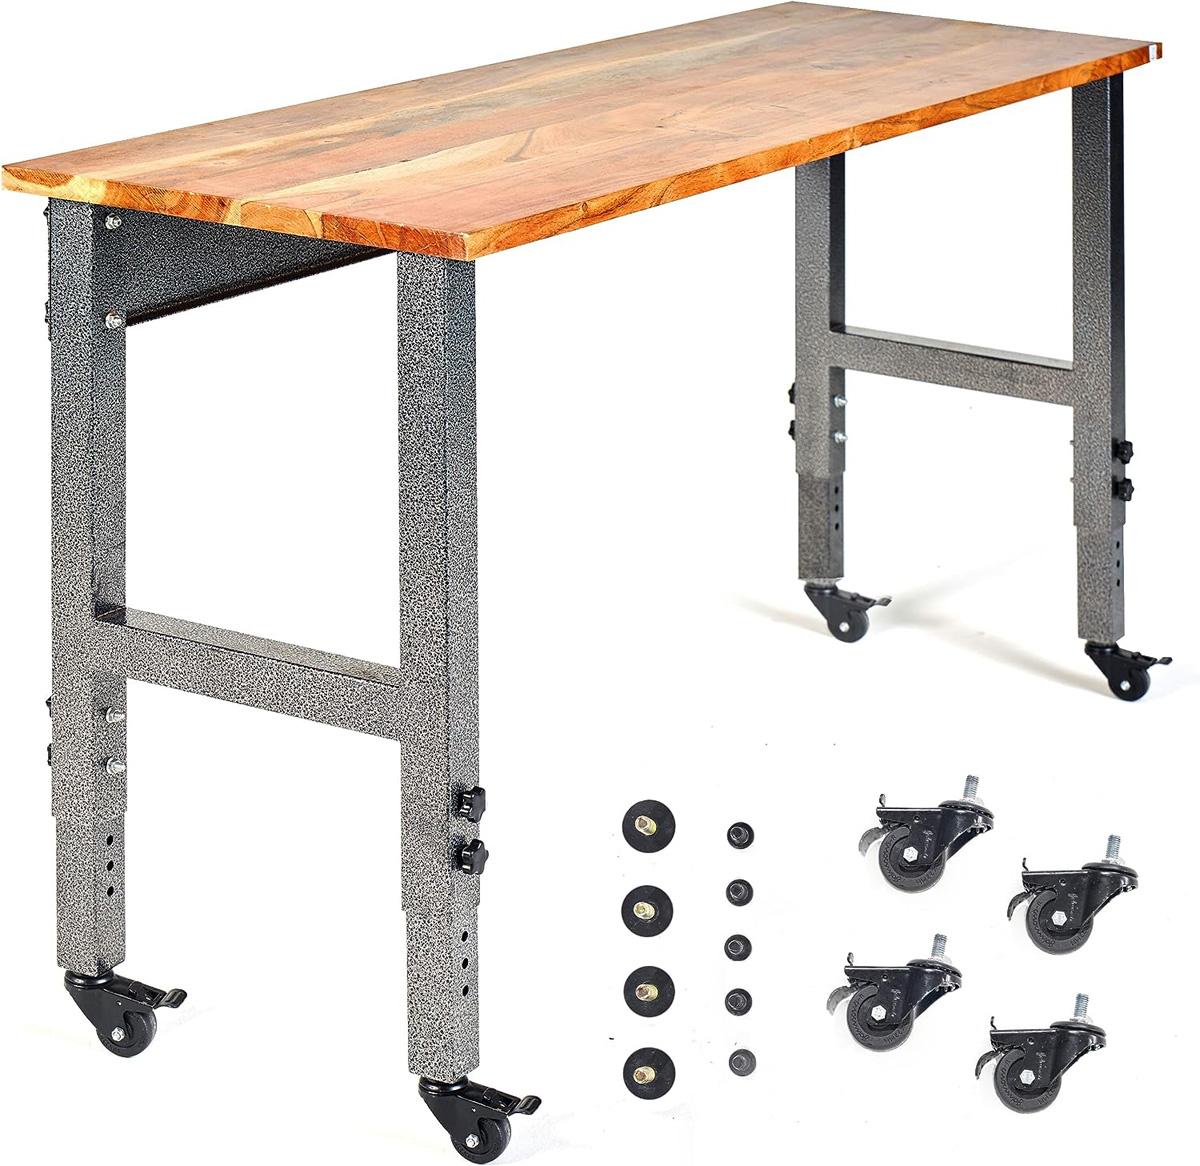 48in Fedmax Work Bench Rolling Portable Workbench for $130.99 Shipped